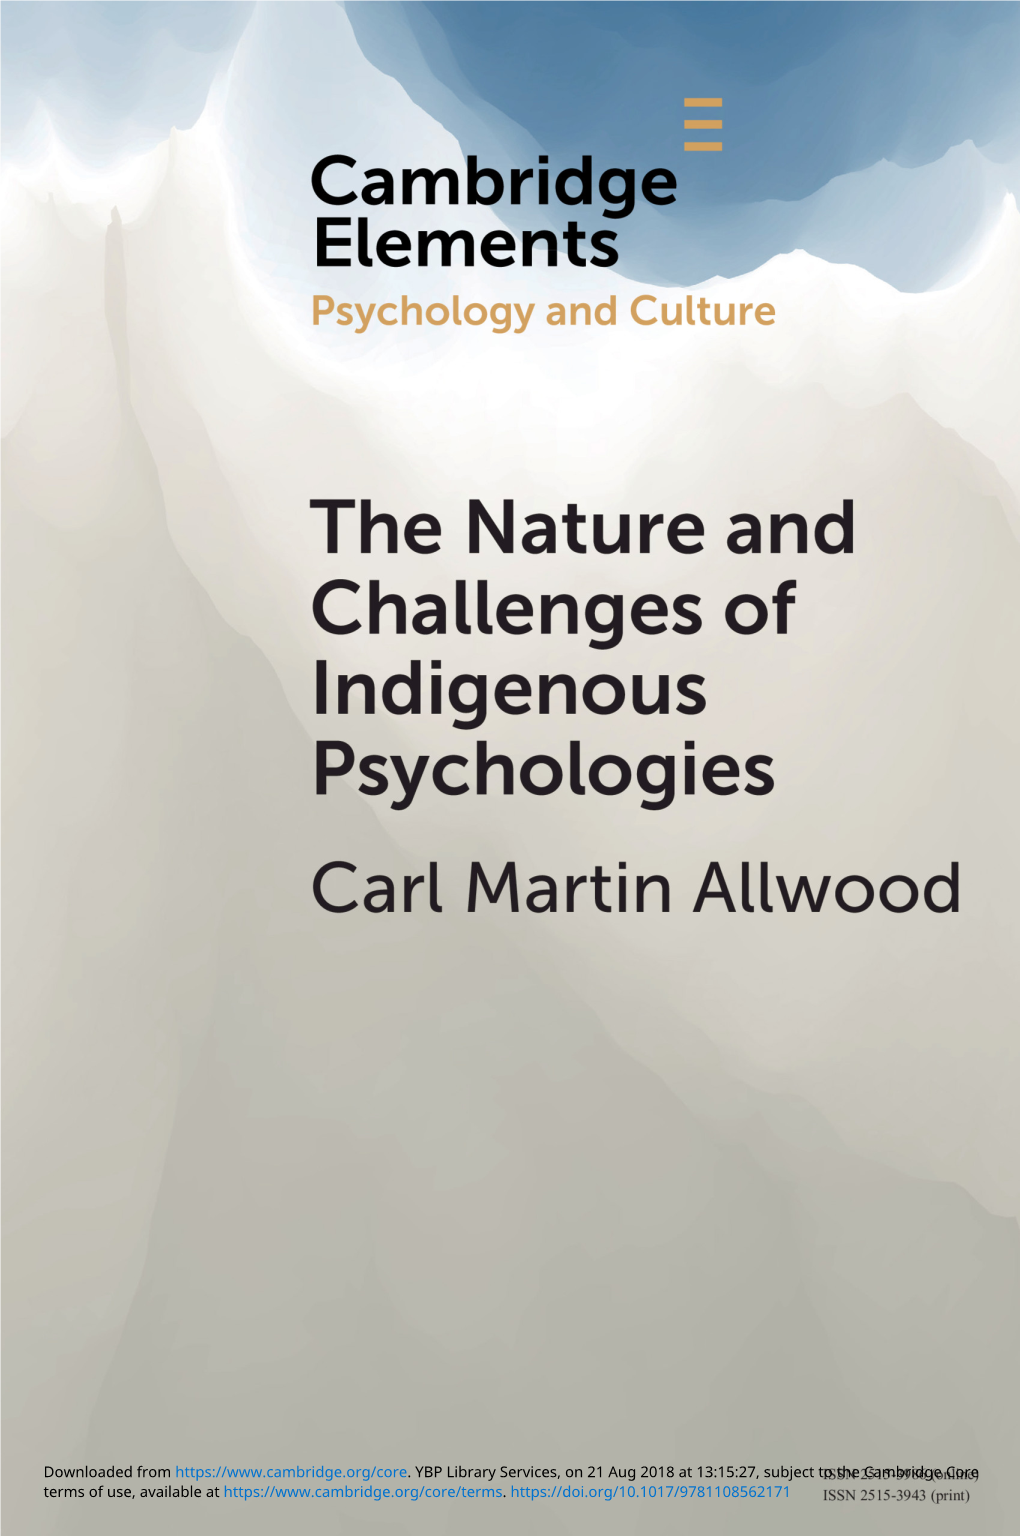 The Nature and Challenges of Indigenous Psychologies